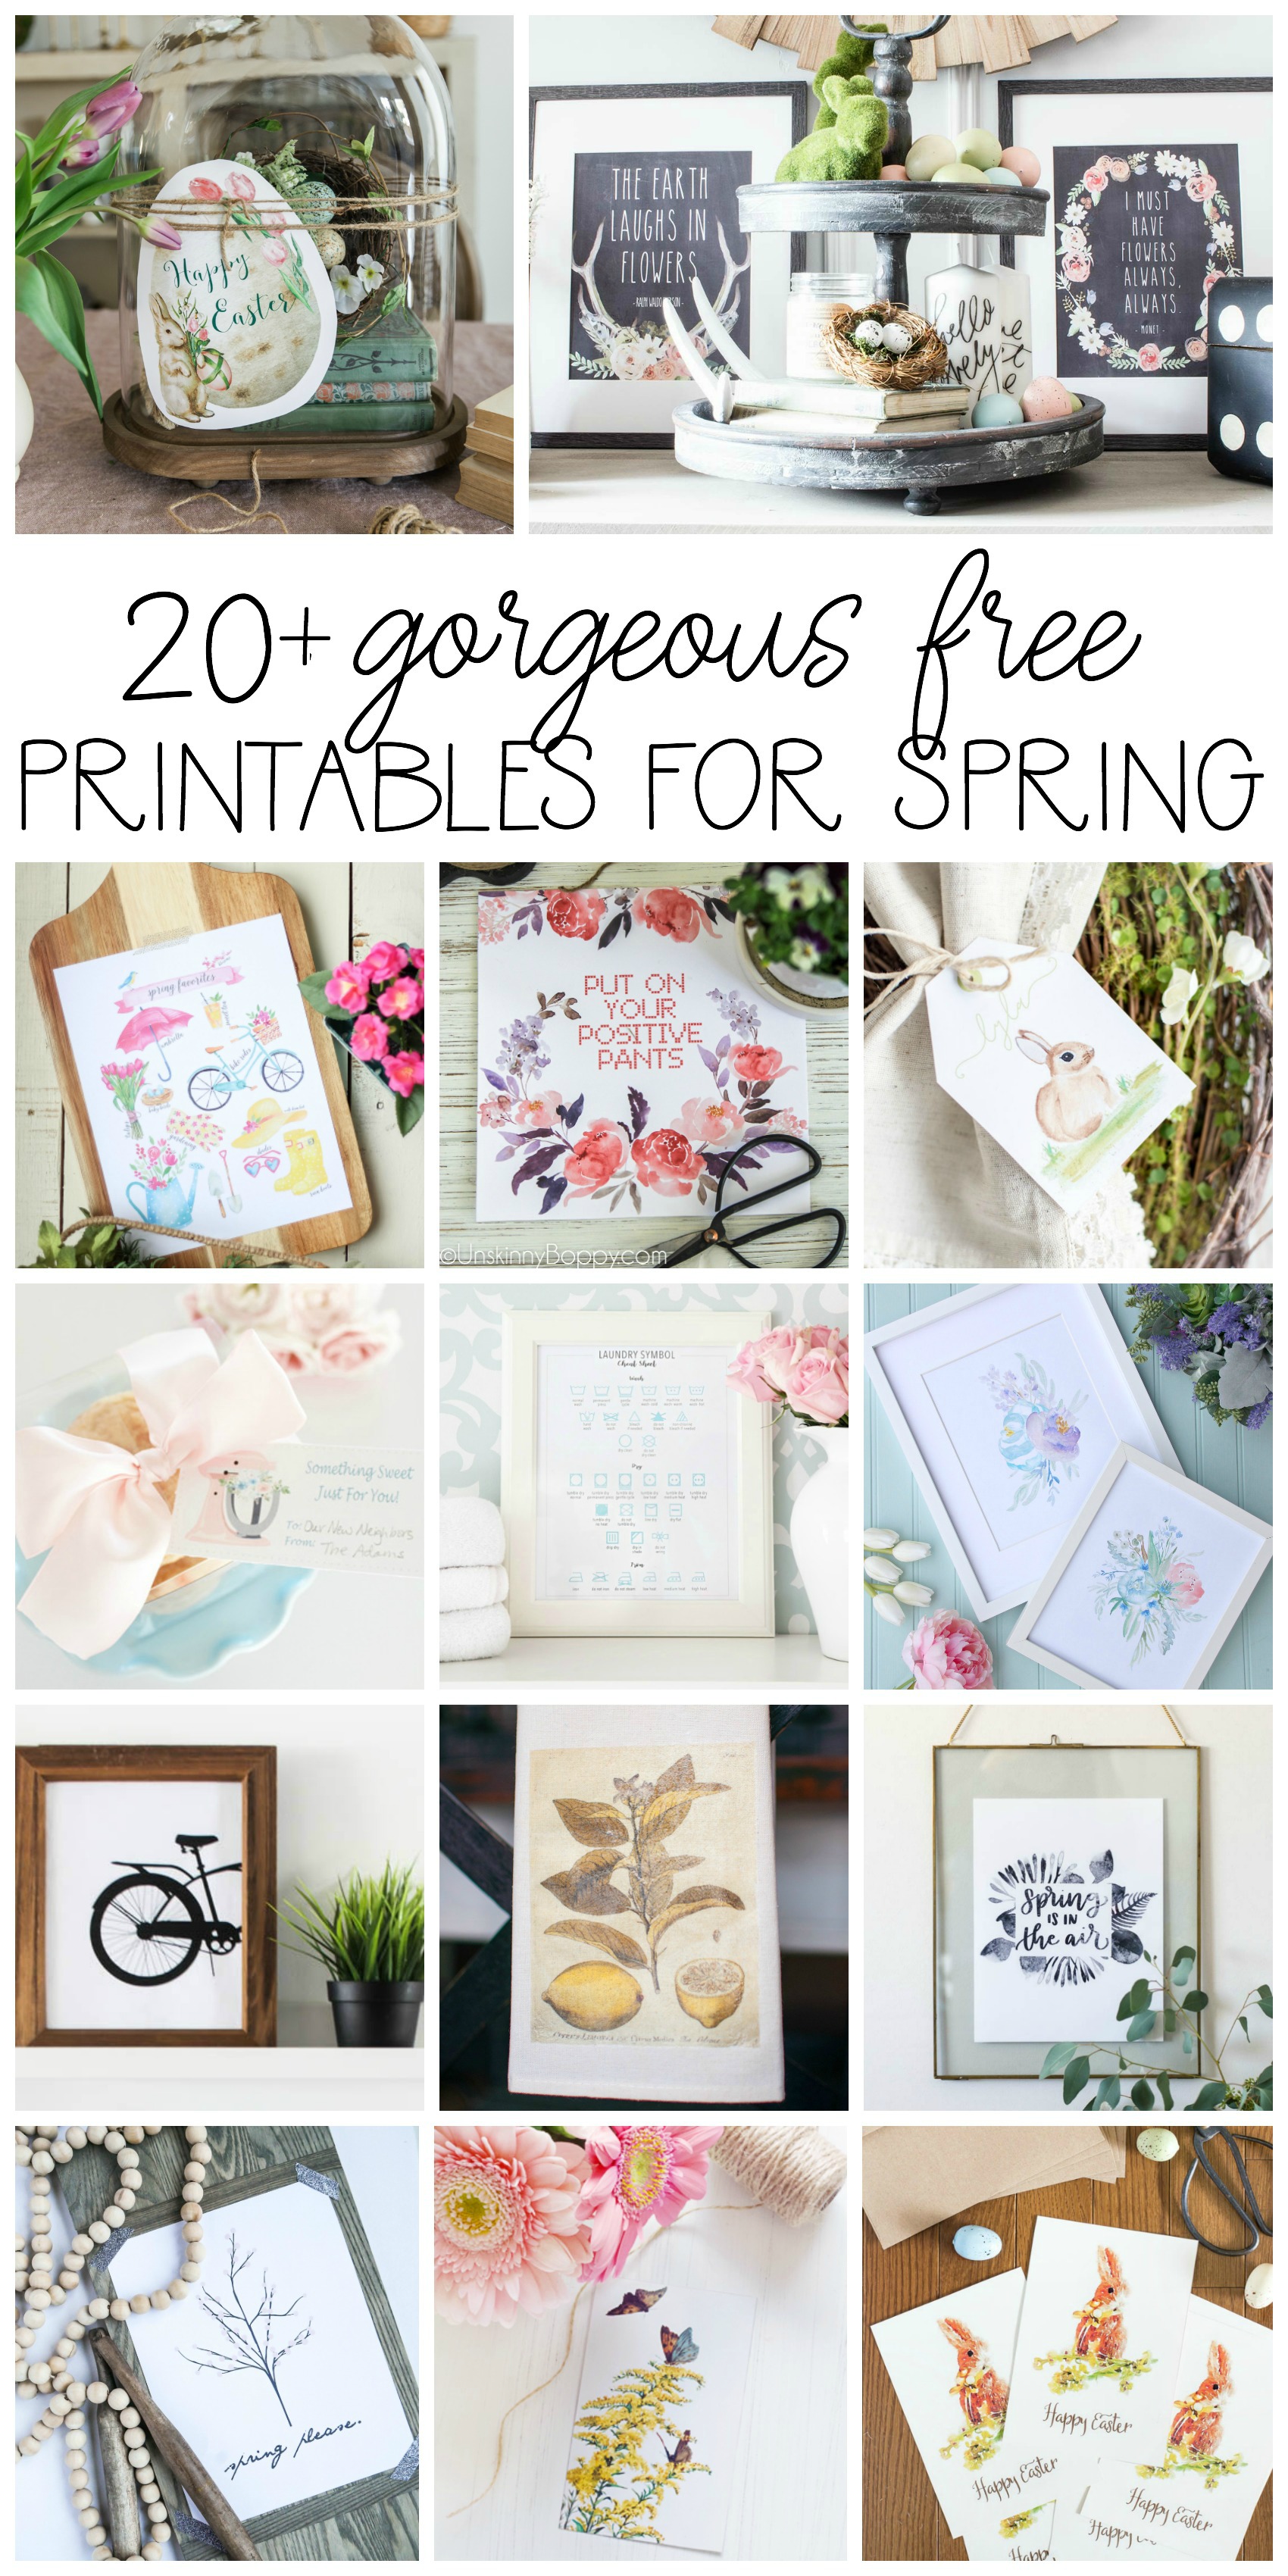 8 Brand New Free Spring Printables - Spring Quotes, Watercolors & Chalkboards